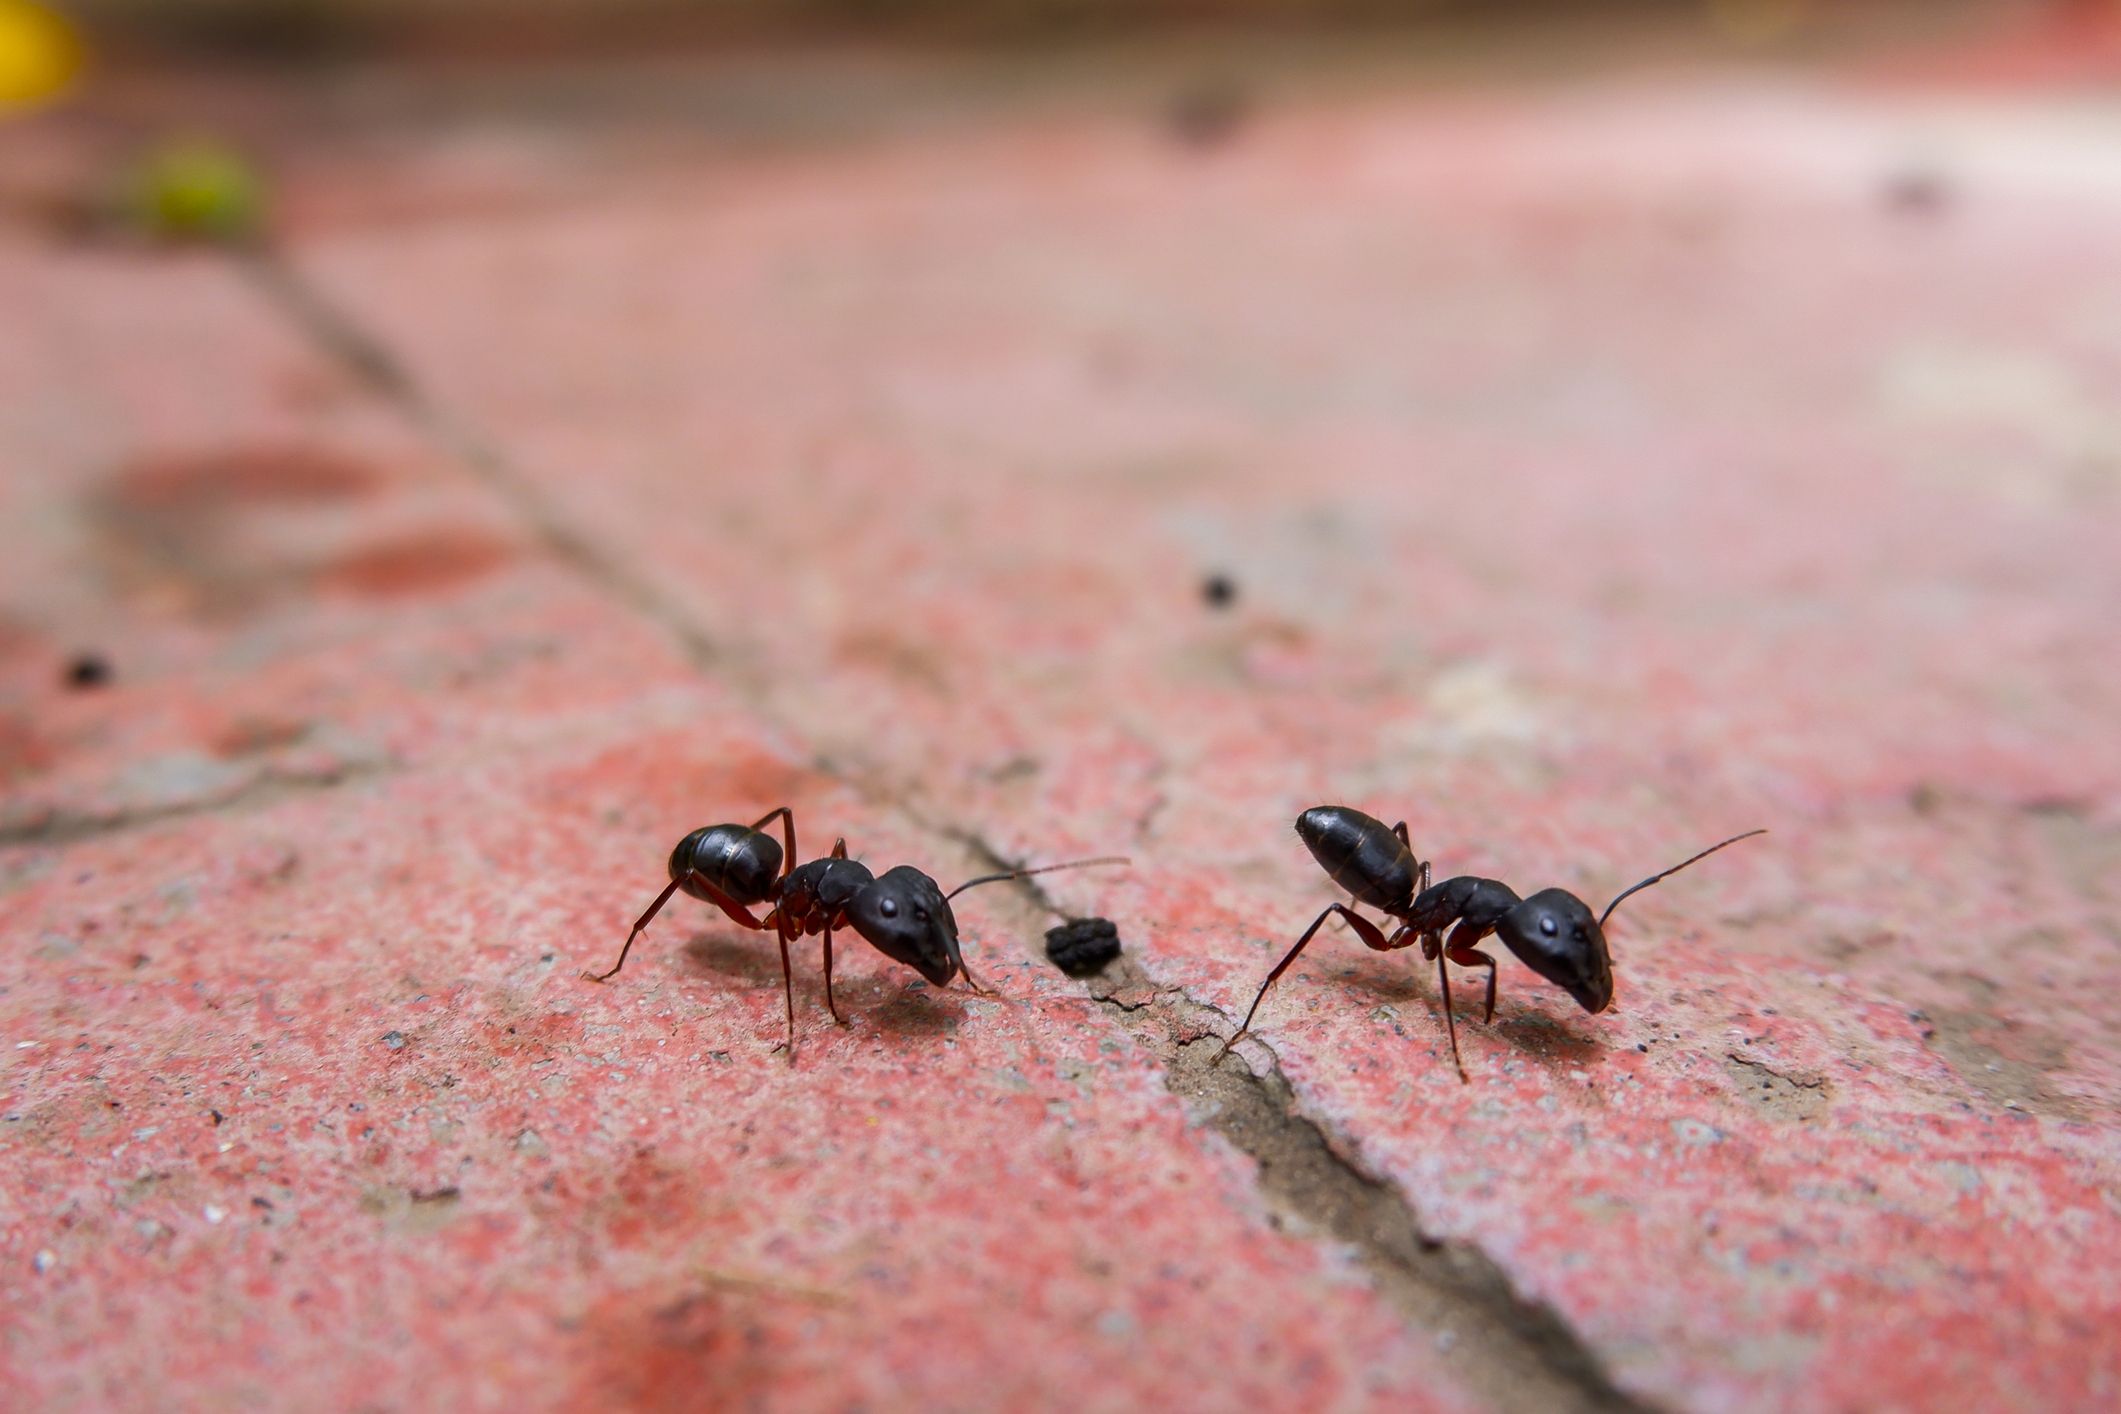 Reds Ants Vs Black Ants Top Differences And How To Kill Both,Cymbidium Orchid Care